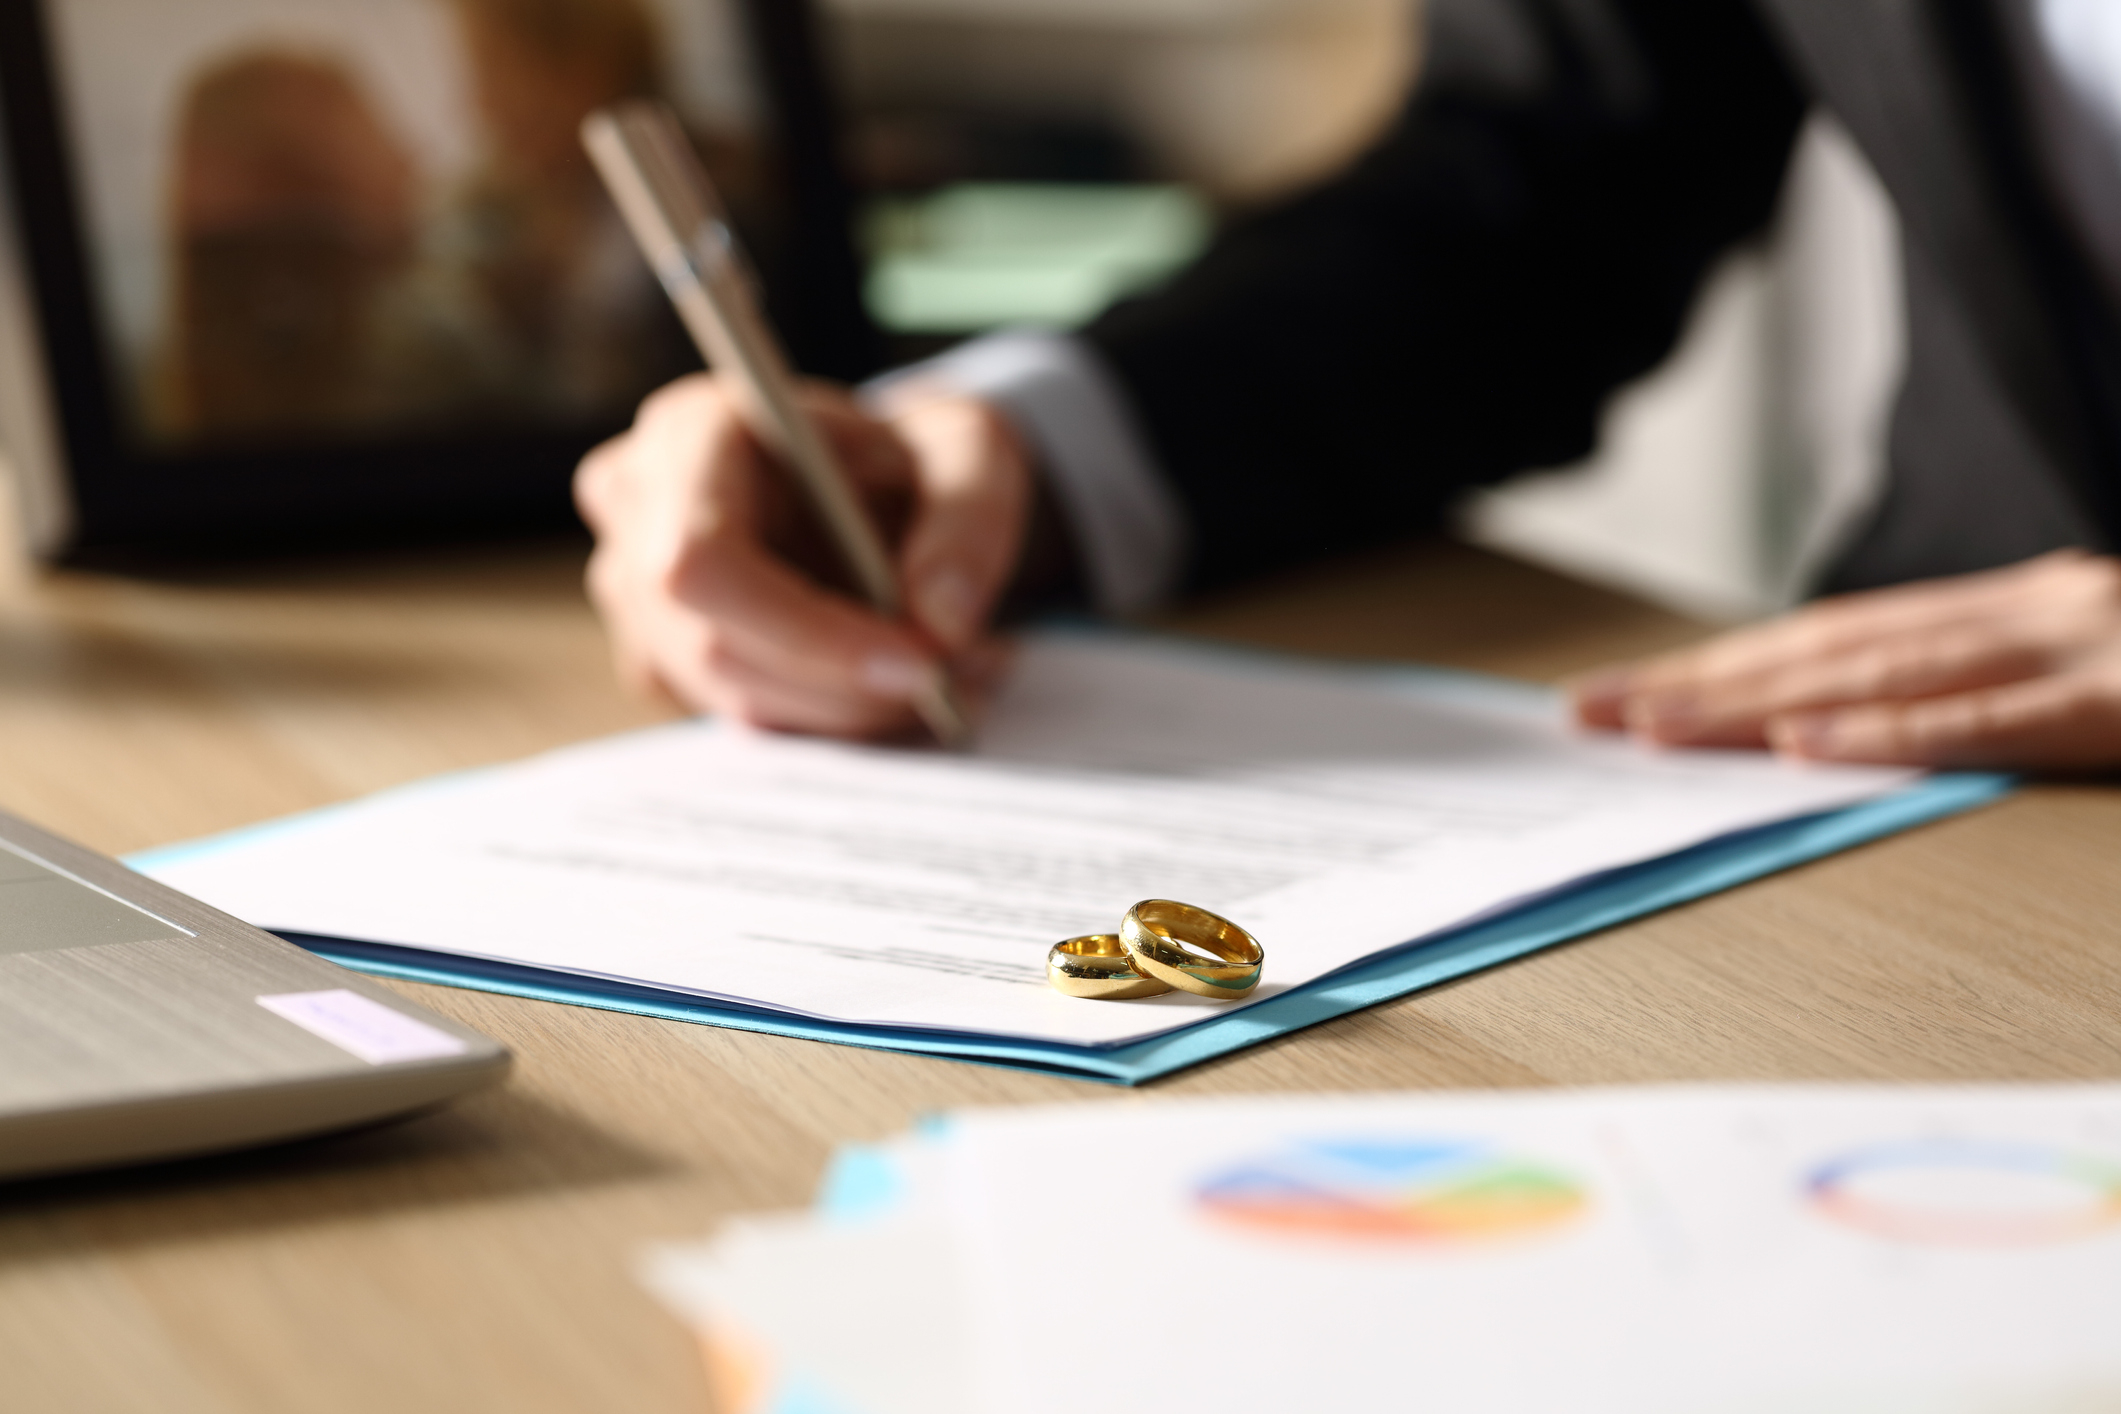 A person signing divorce papers with two wedding bands on the corner of the paper